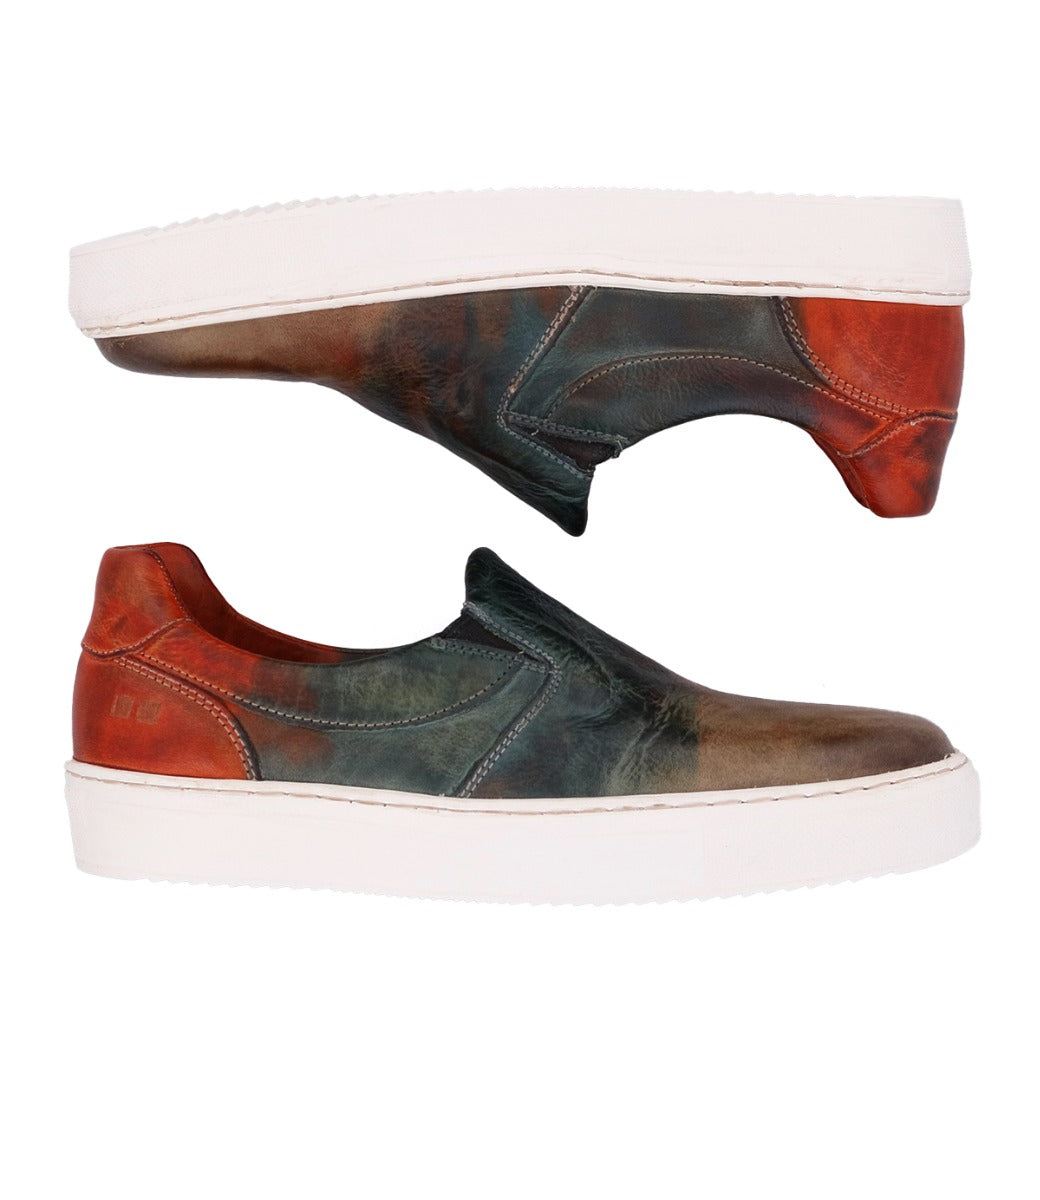 A pair of Bed Stu Hermione women's slip - on sneakers with a multi - color dye.